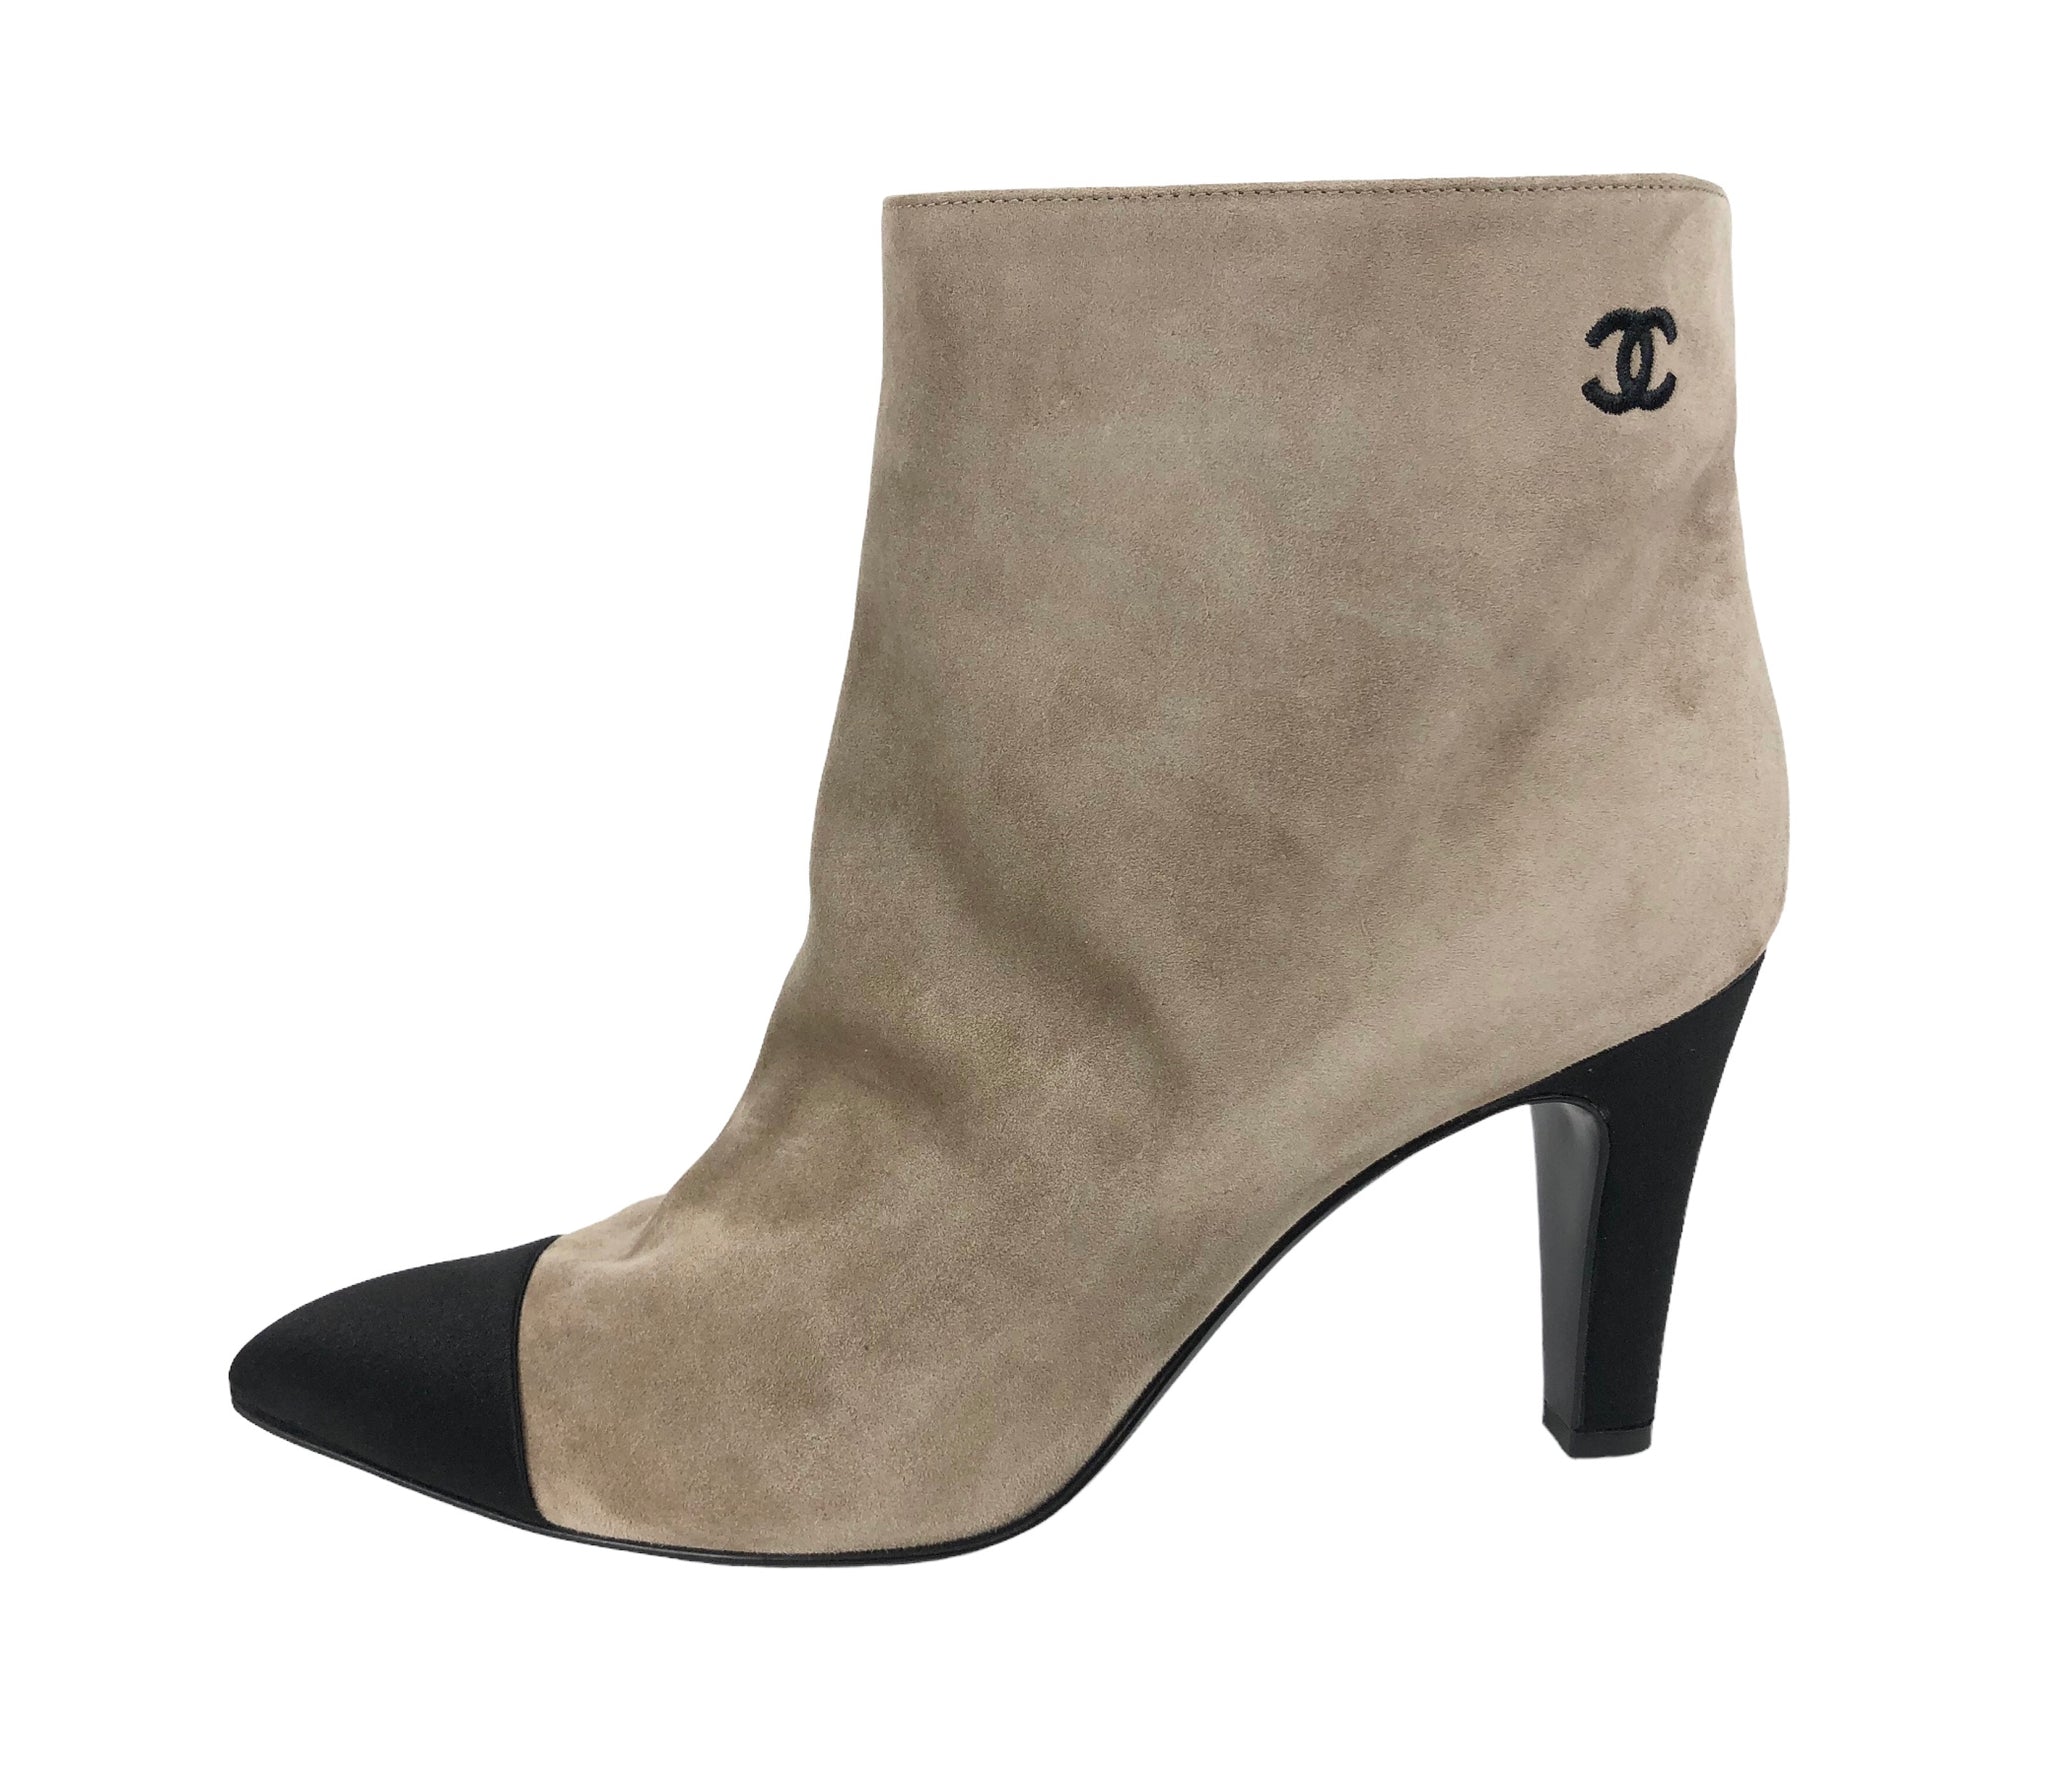 Chanel Suede Ankle Boots